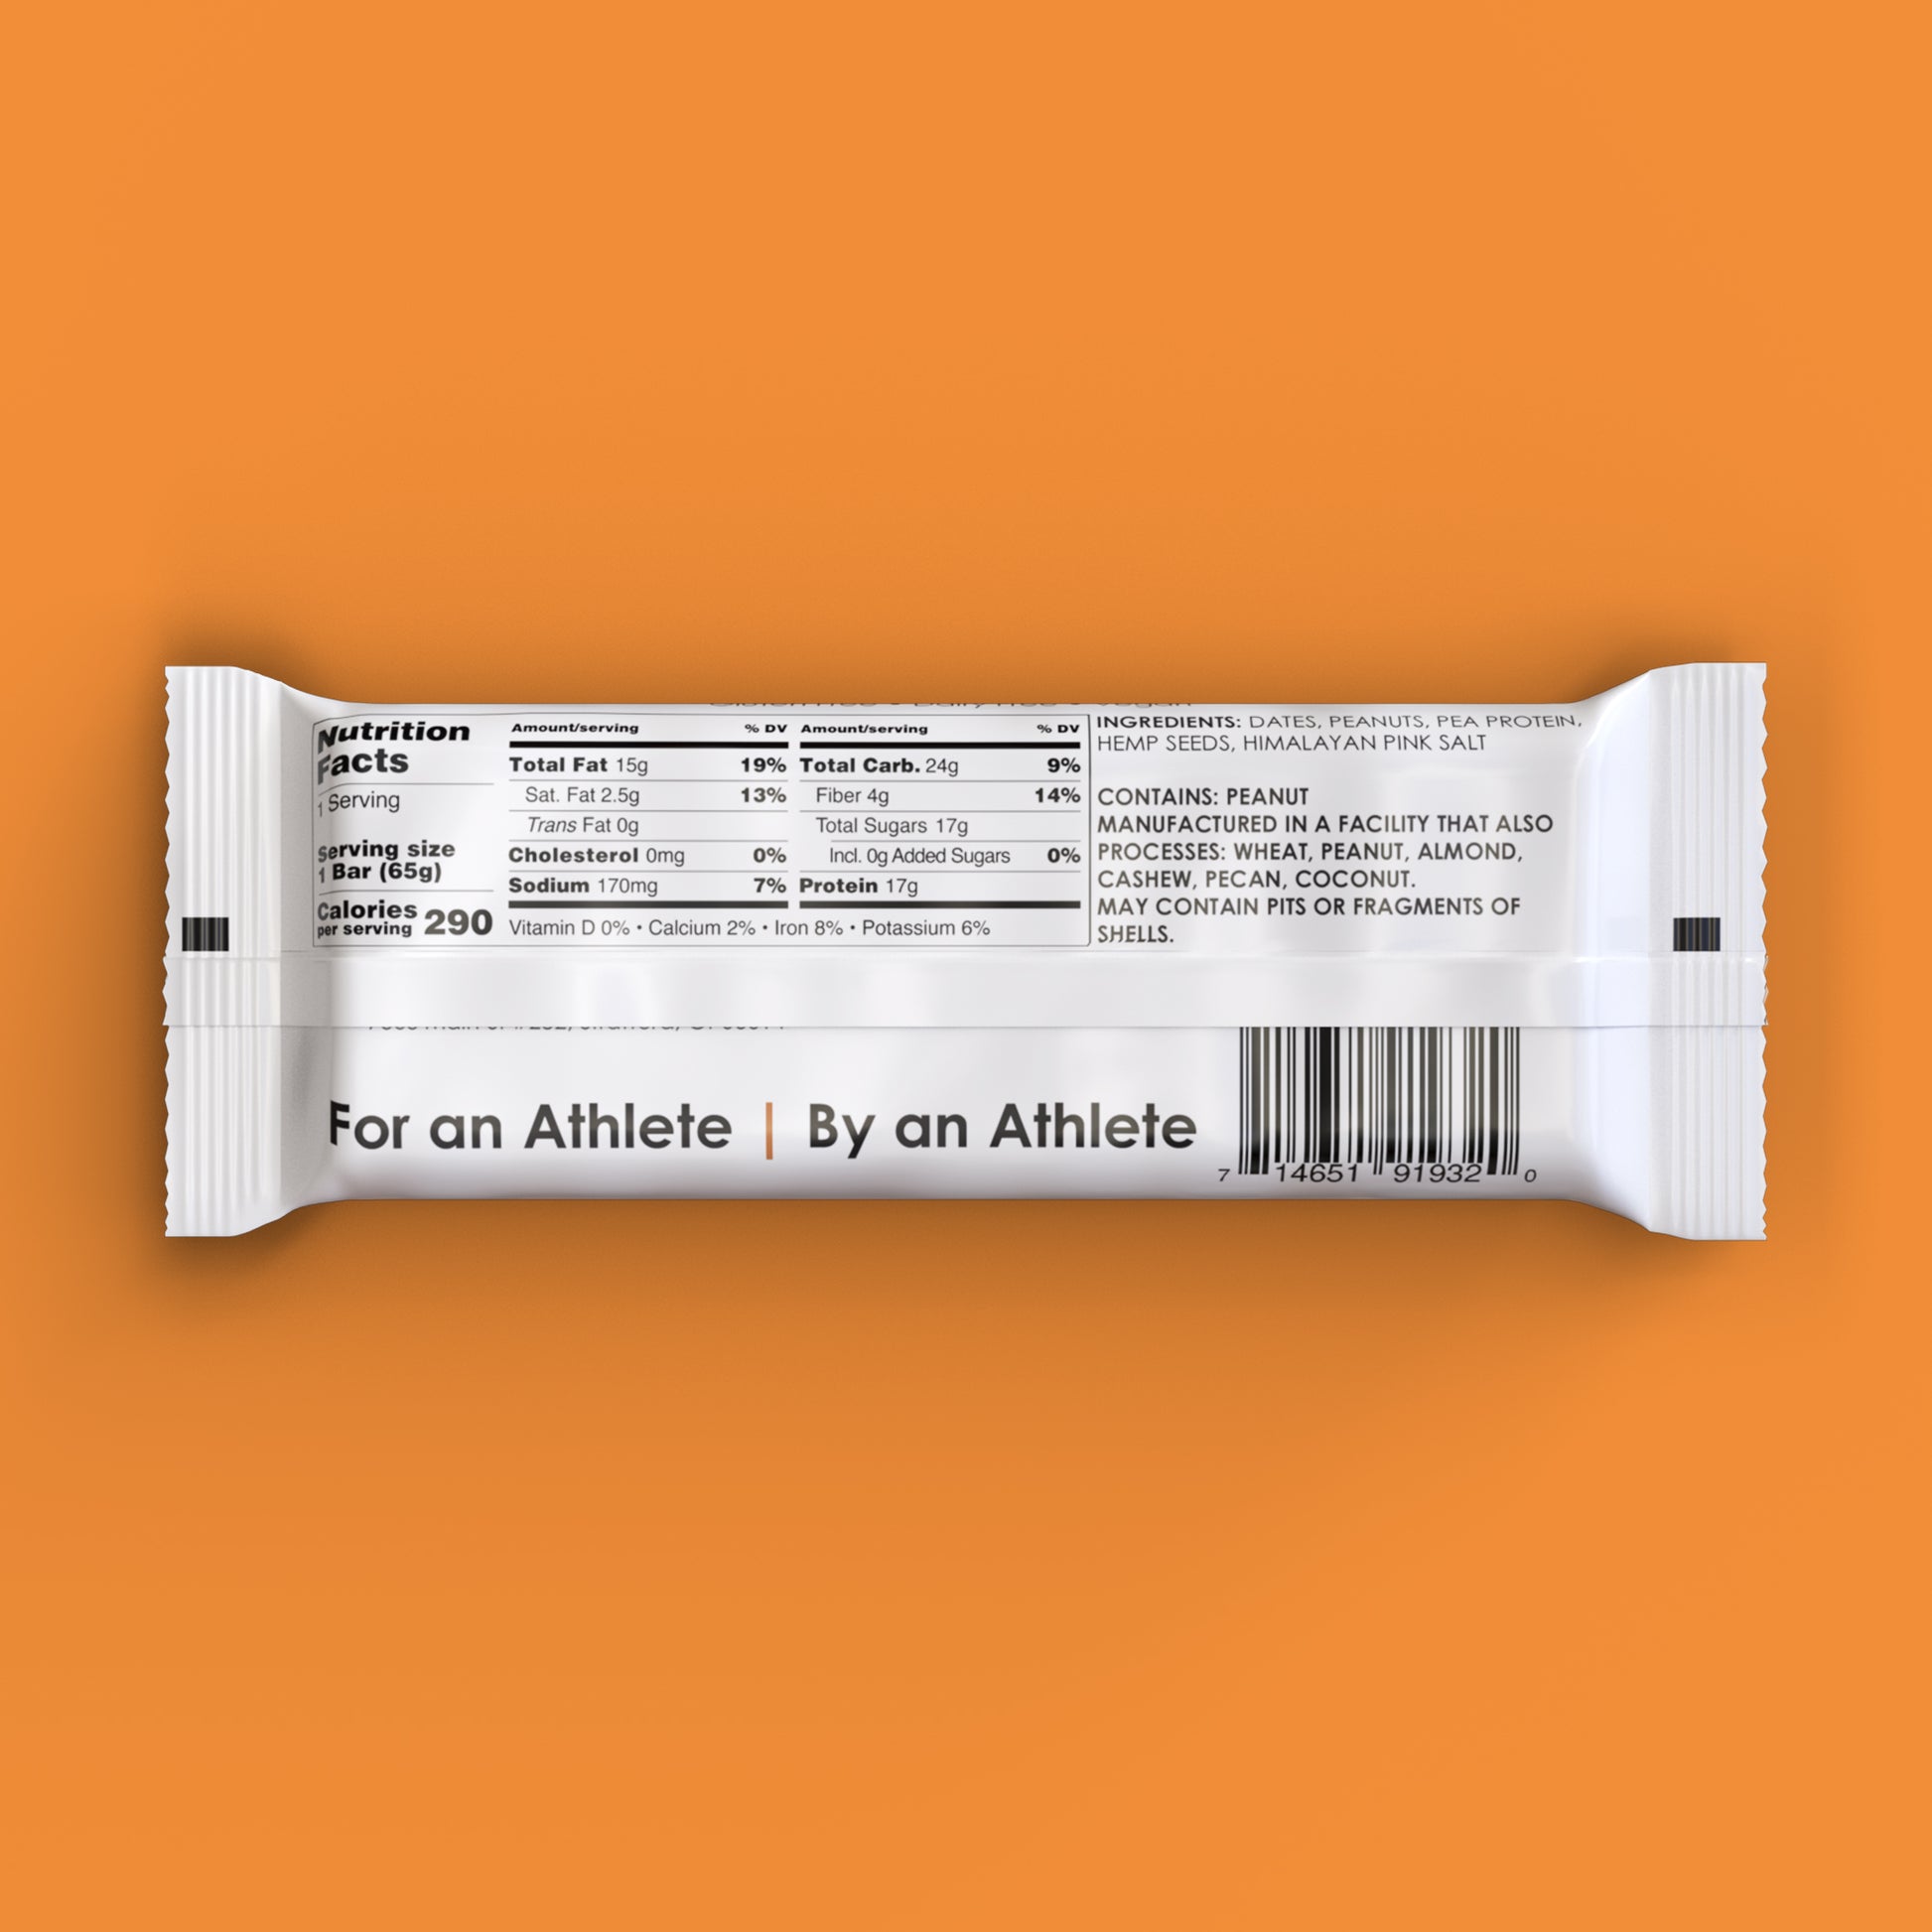 A salted peanut TIROBAR, a vegan and all natural protein bar, sits in a white wrapper against an orange background. The bar is visible from the top with a clear view of the nutrition facts. For an Athlete | By an Athlete.